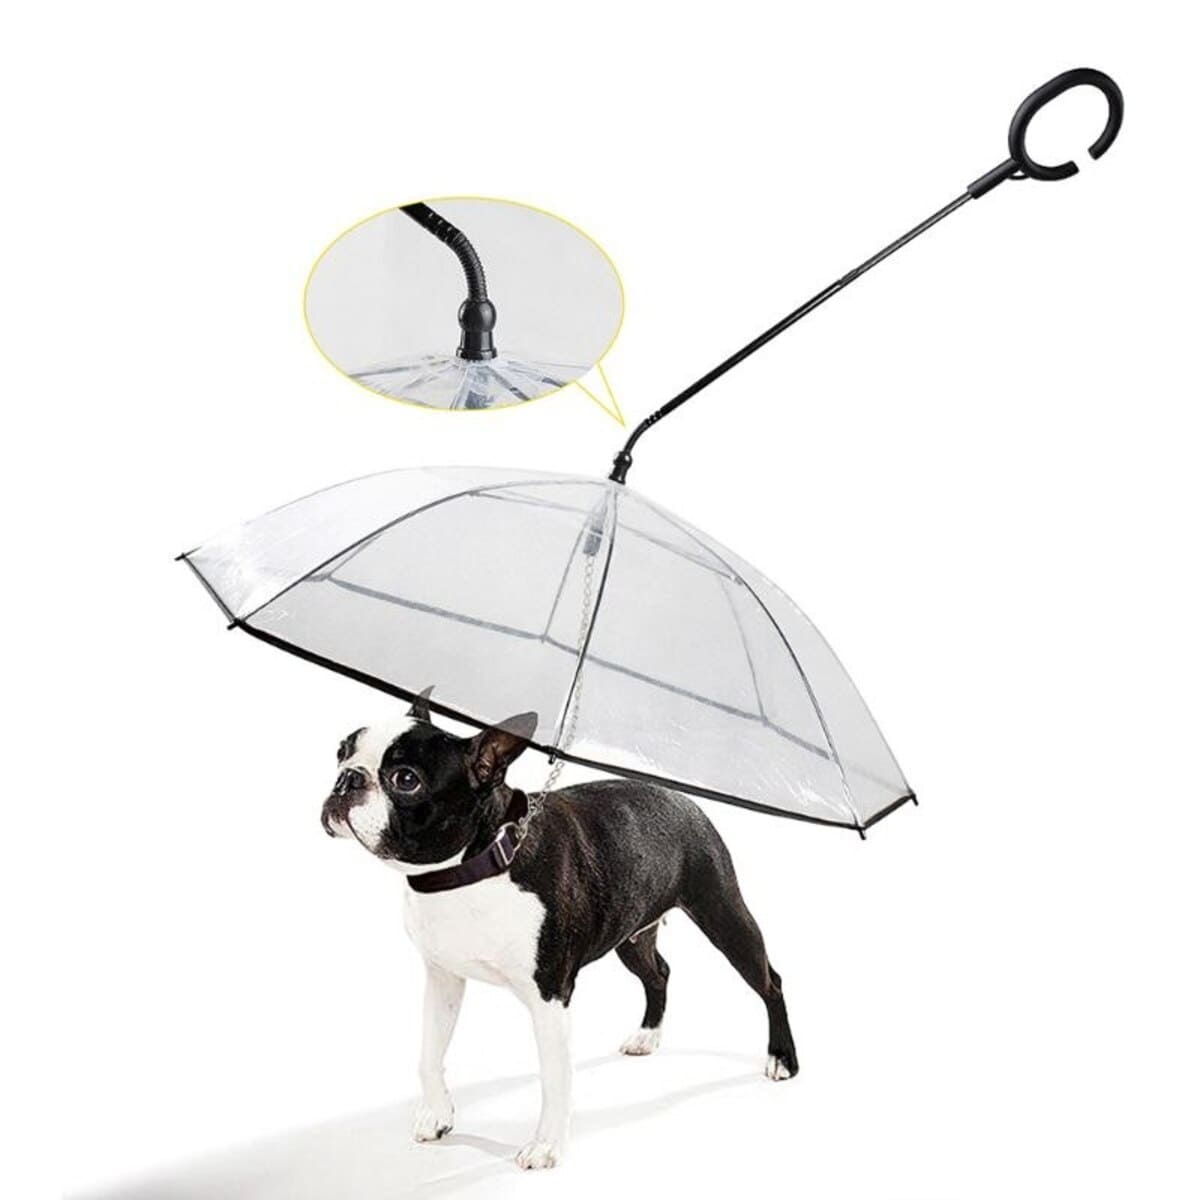 Umbrella for dogs - DiFreight